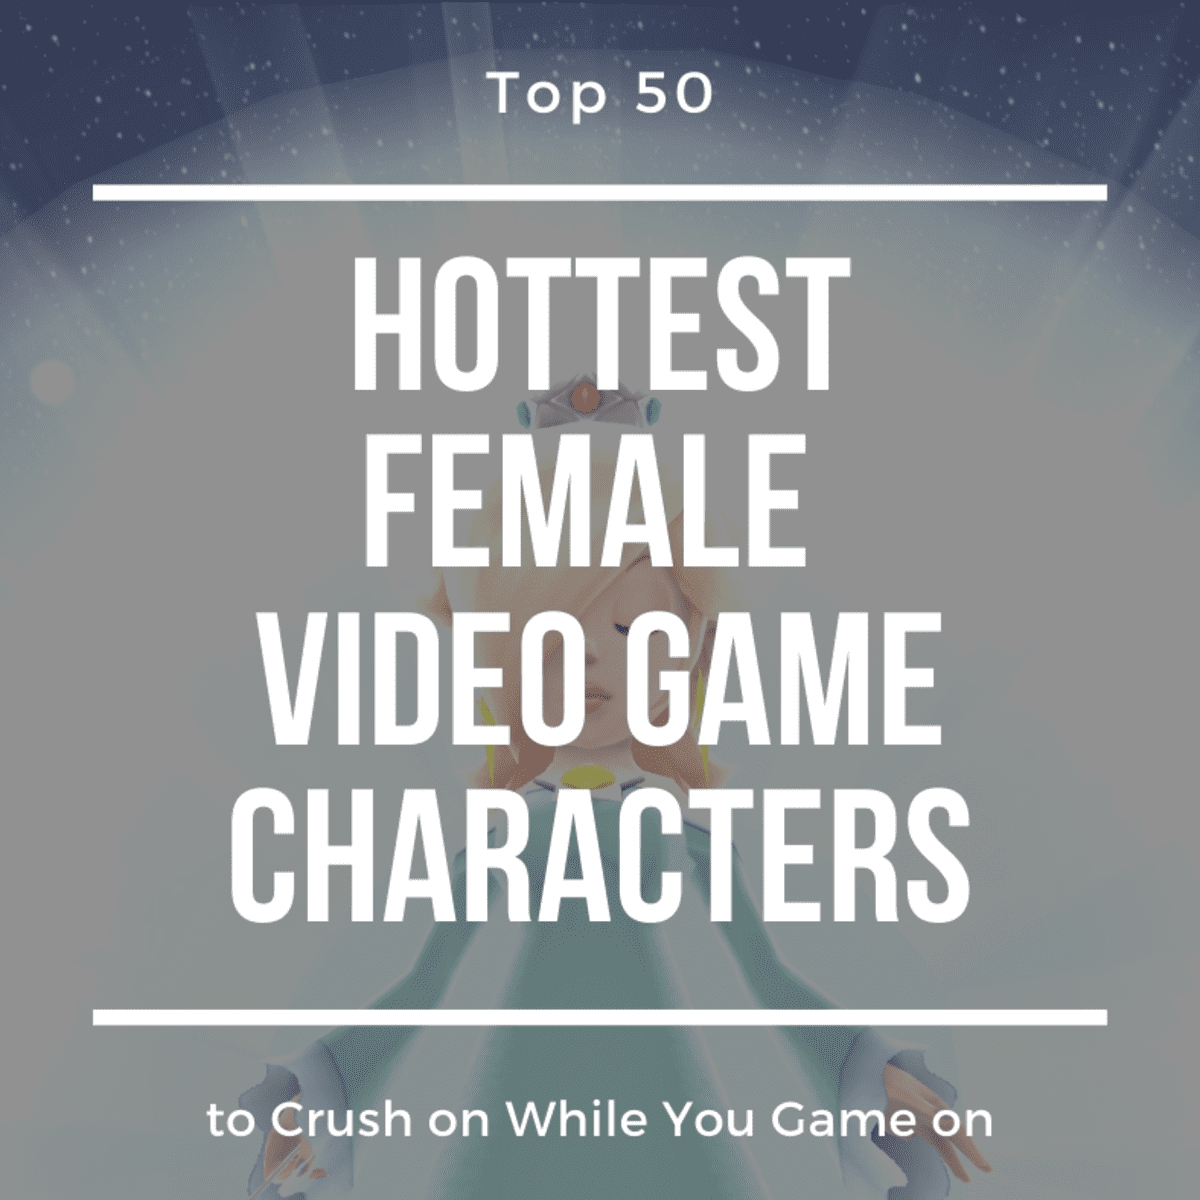 detail Explore Iconic Characters and Hot Games on Hotcharacters